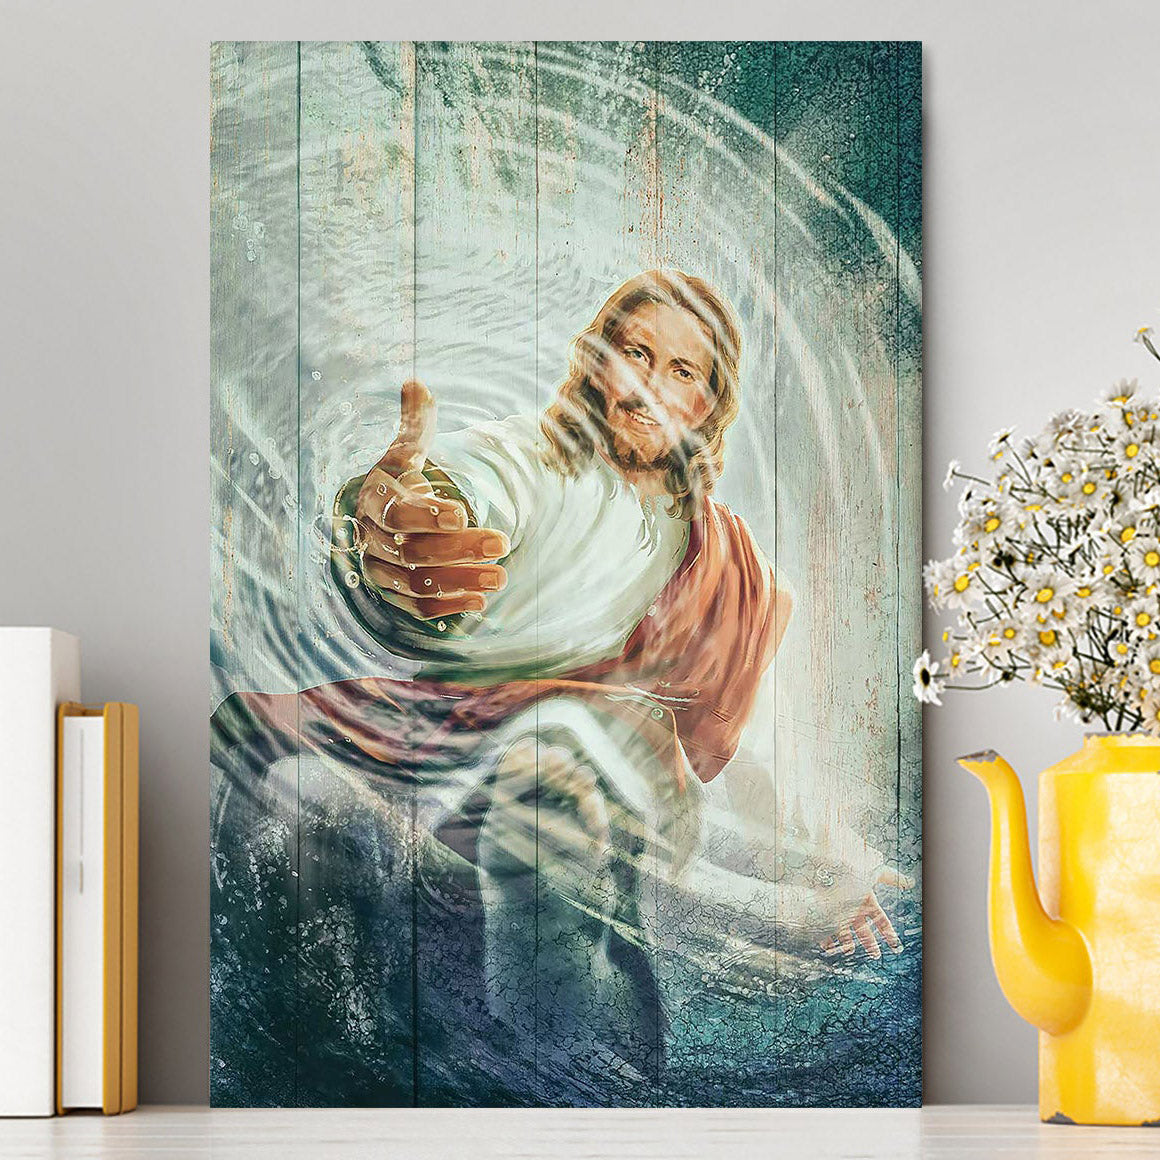 The Hand Of God Canvas - Take His Hand Through The Water Canvas Art - Christian Art - Bible Verse Wall Art - Religious Home Decor